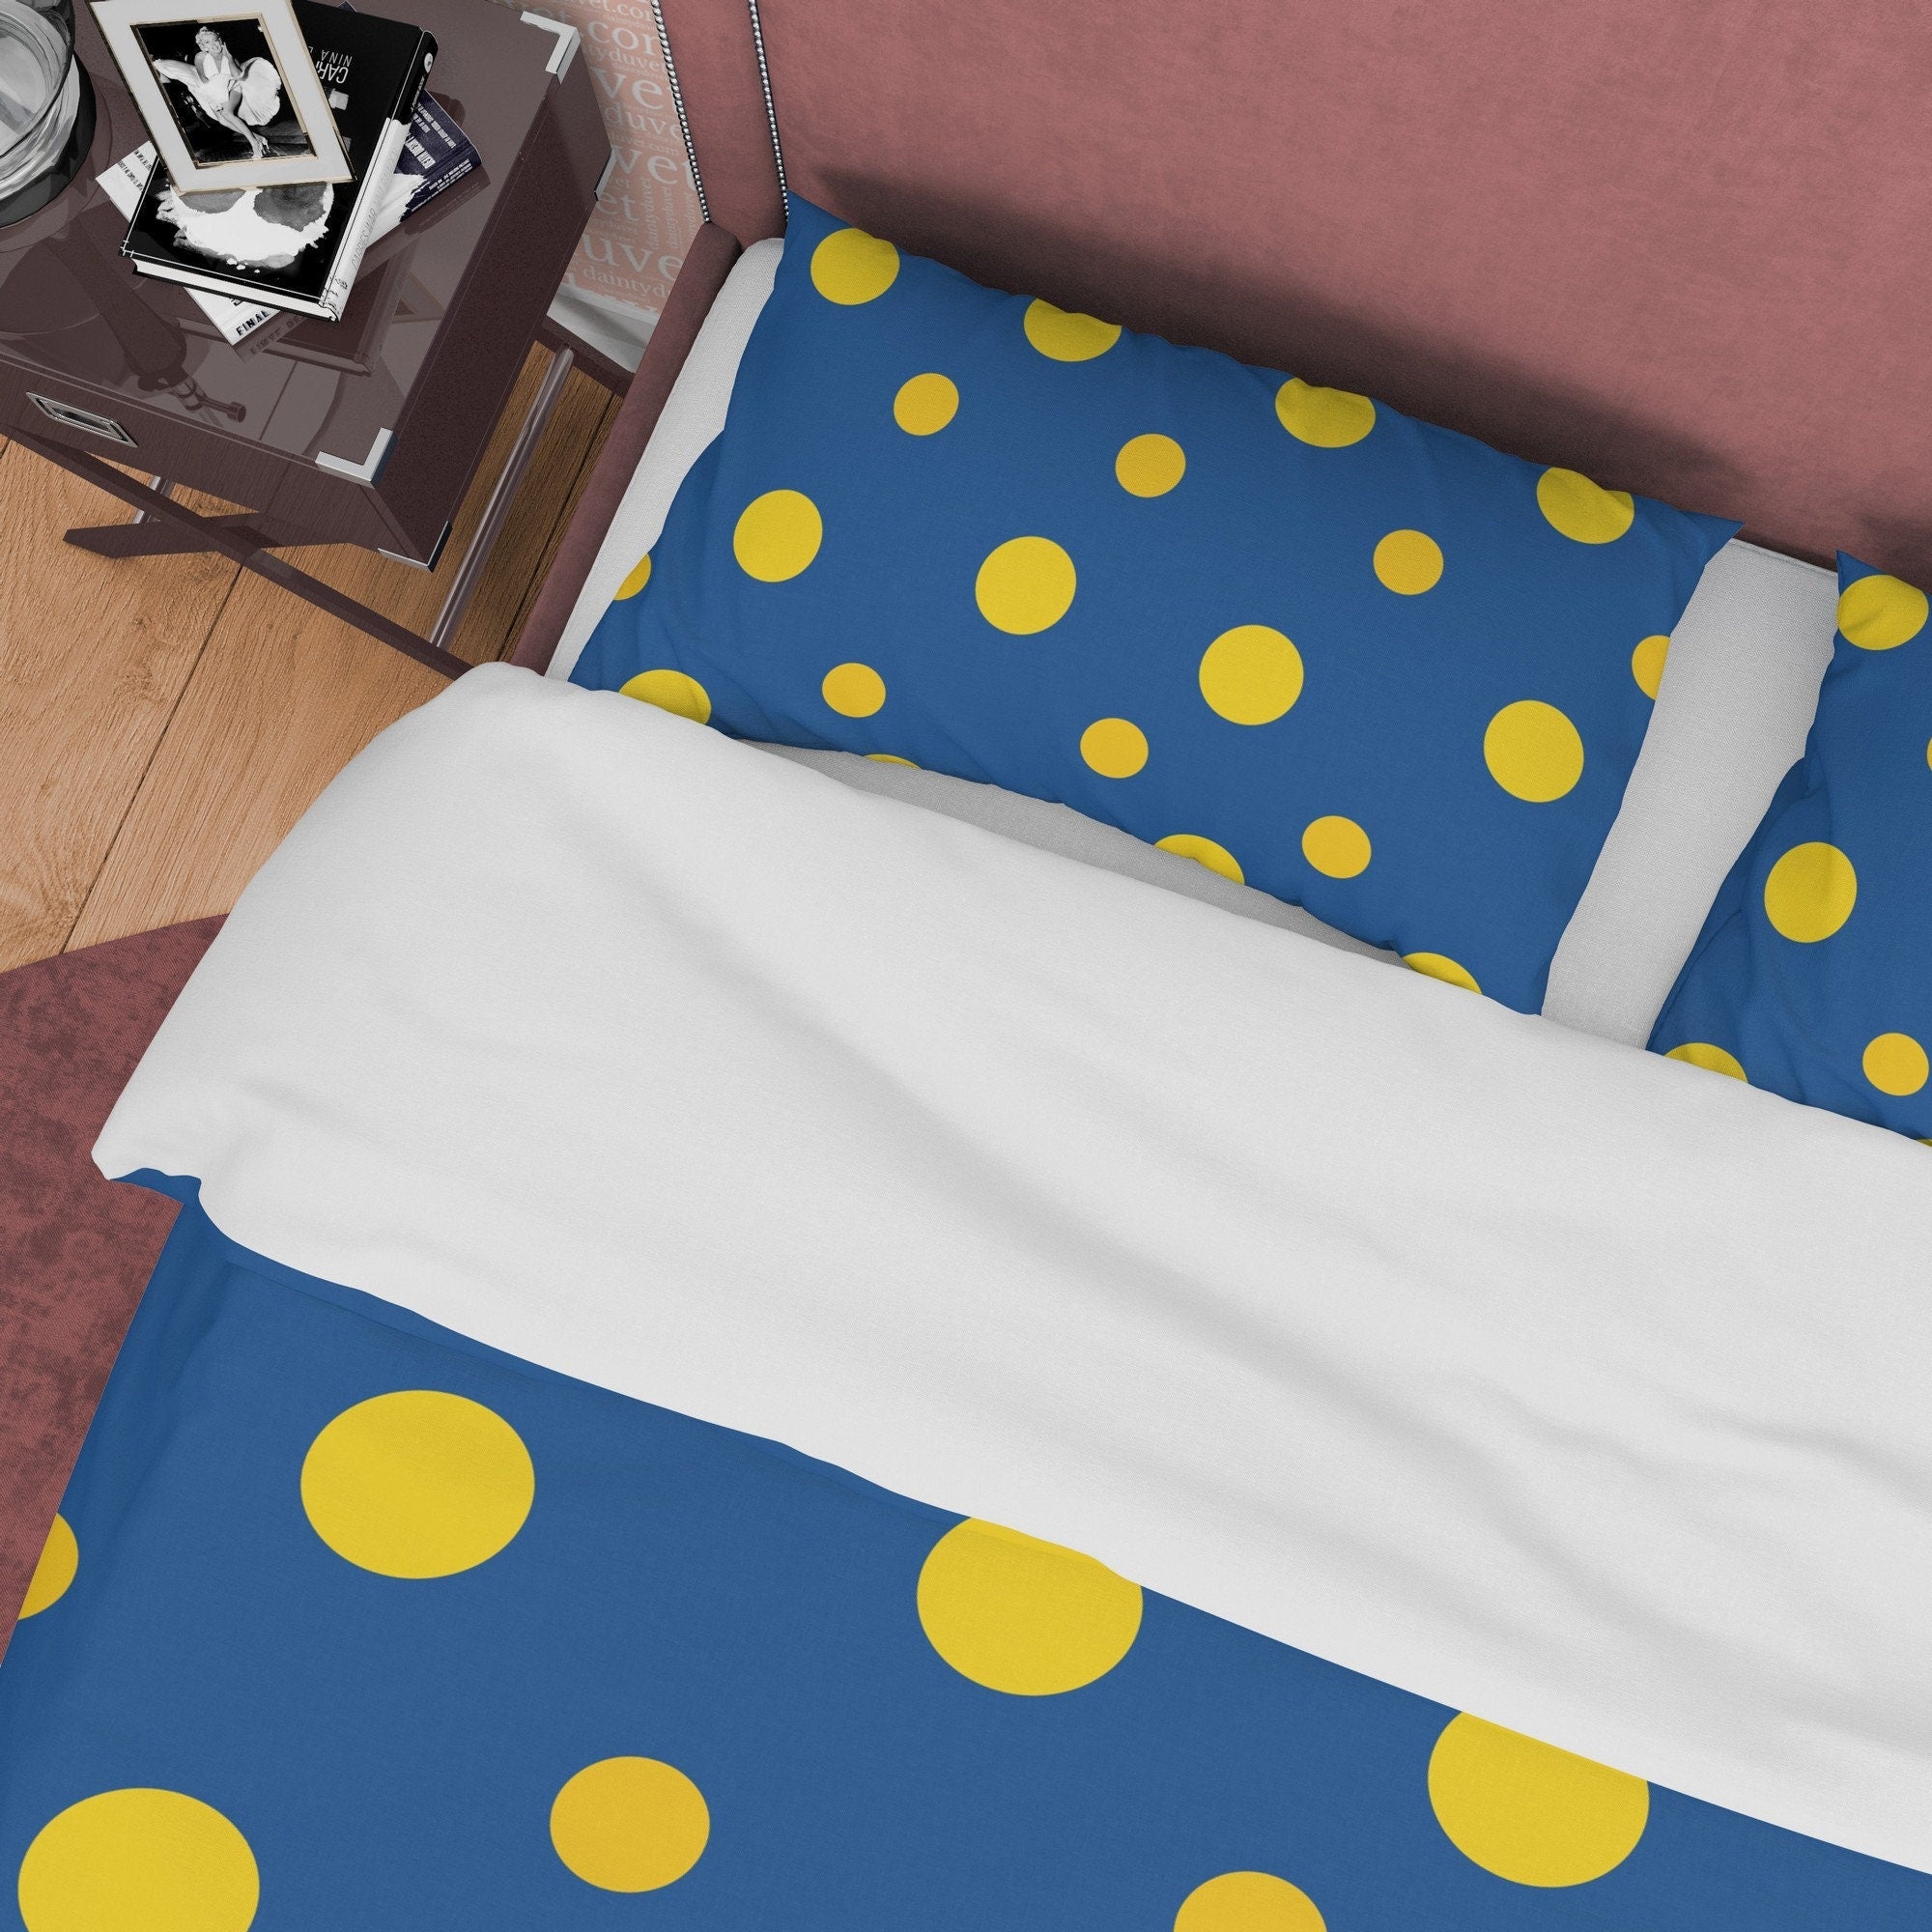 Blue Polka Dot Duvet Cover Geometric Bedding, Mid Century Modern Bedroom Set, Yellow Dotted Quilt Cover, Simple Unique Colorful Bedspread